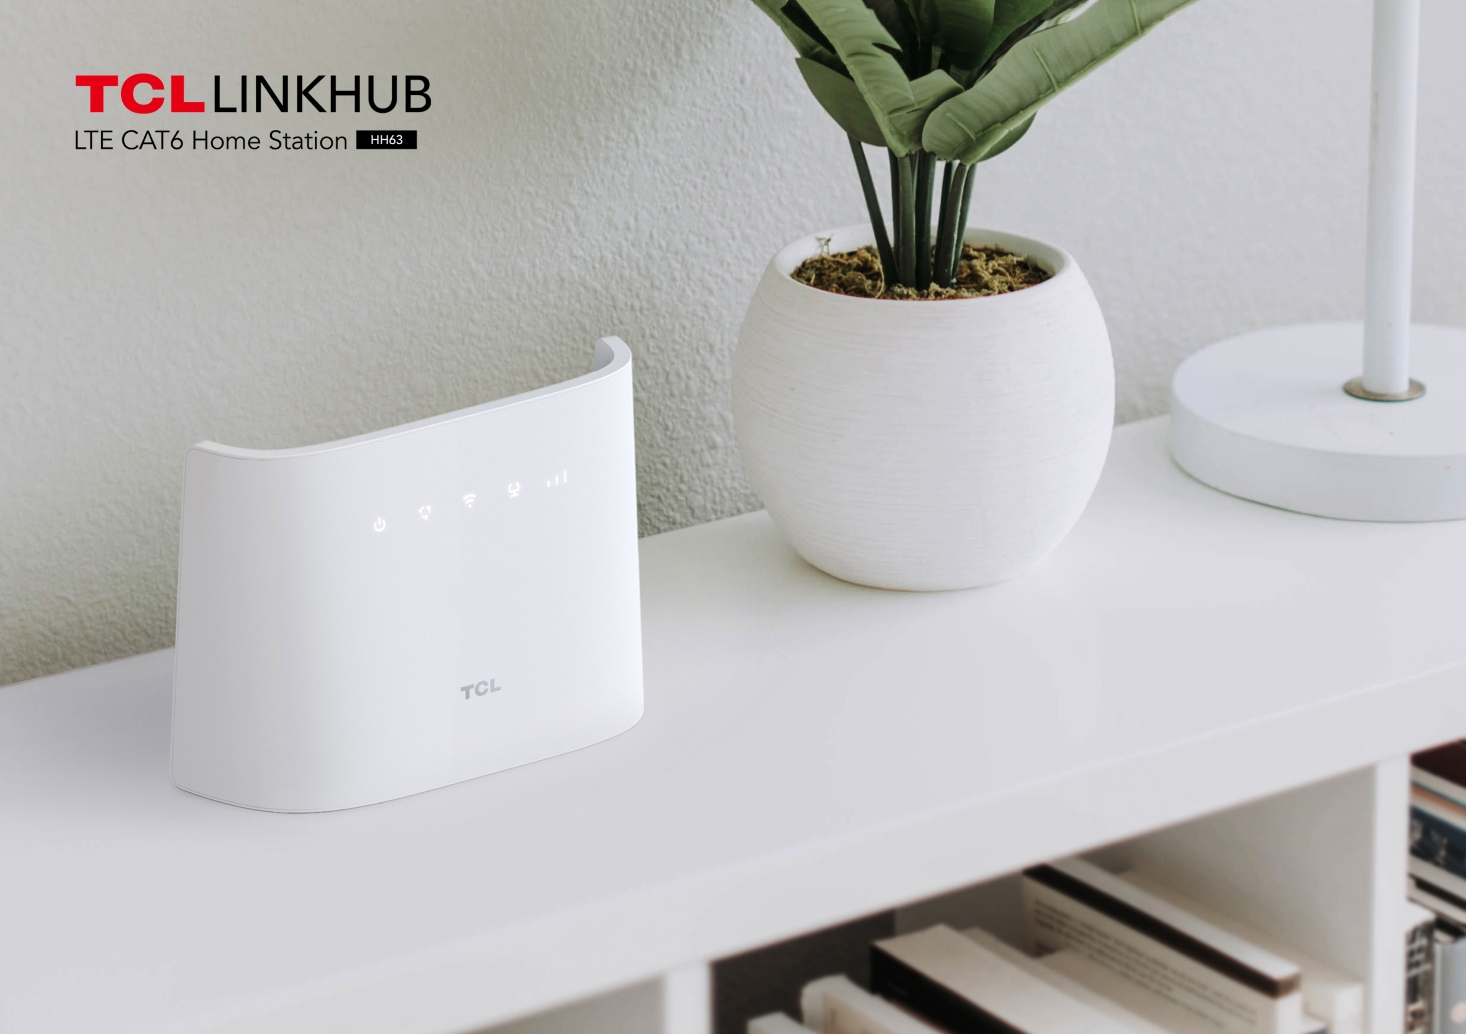 TCL LinkHub 5G review: the all-rounder (5G) router! - GizChina.it